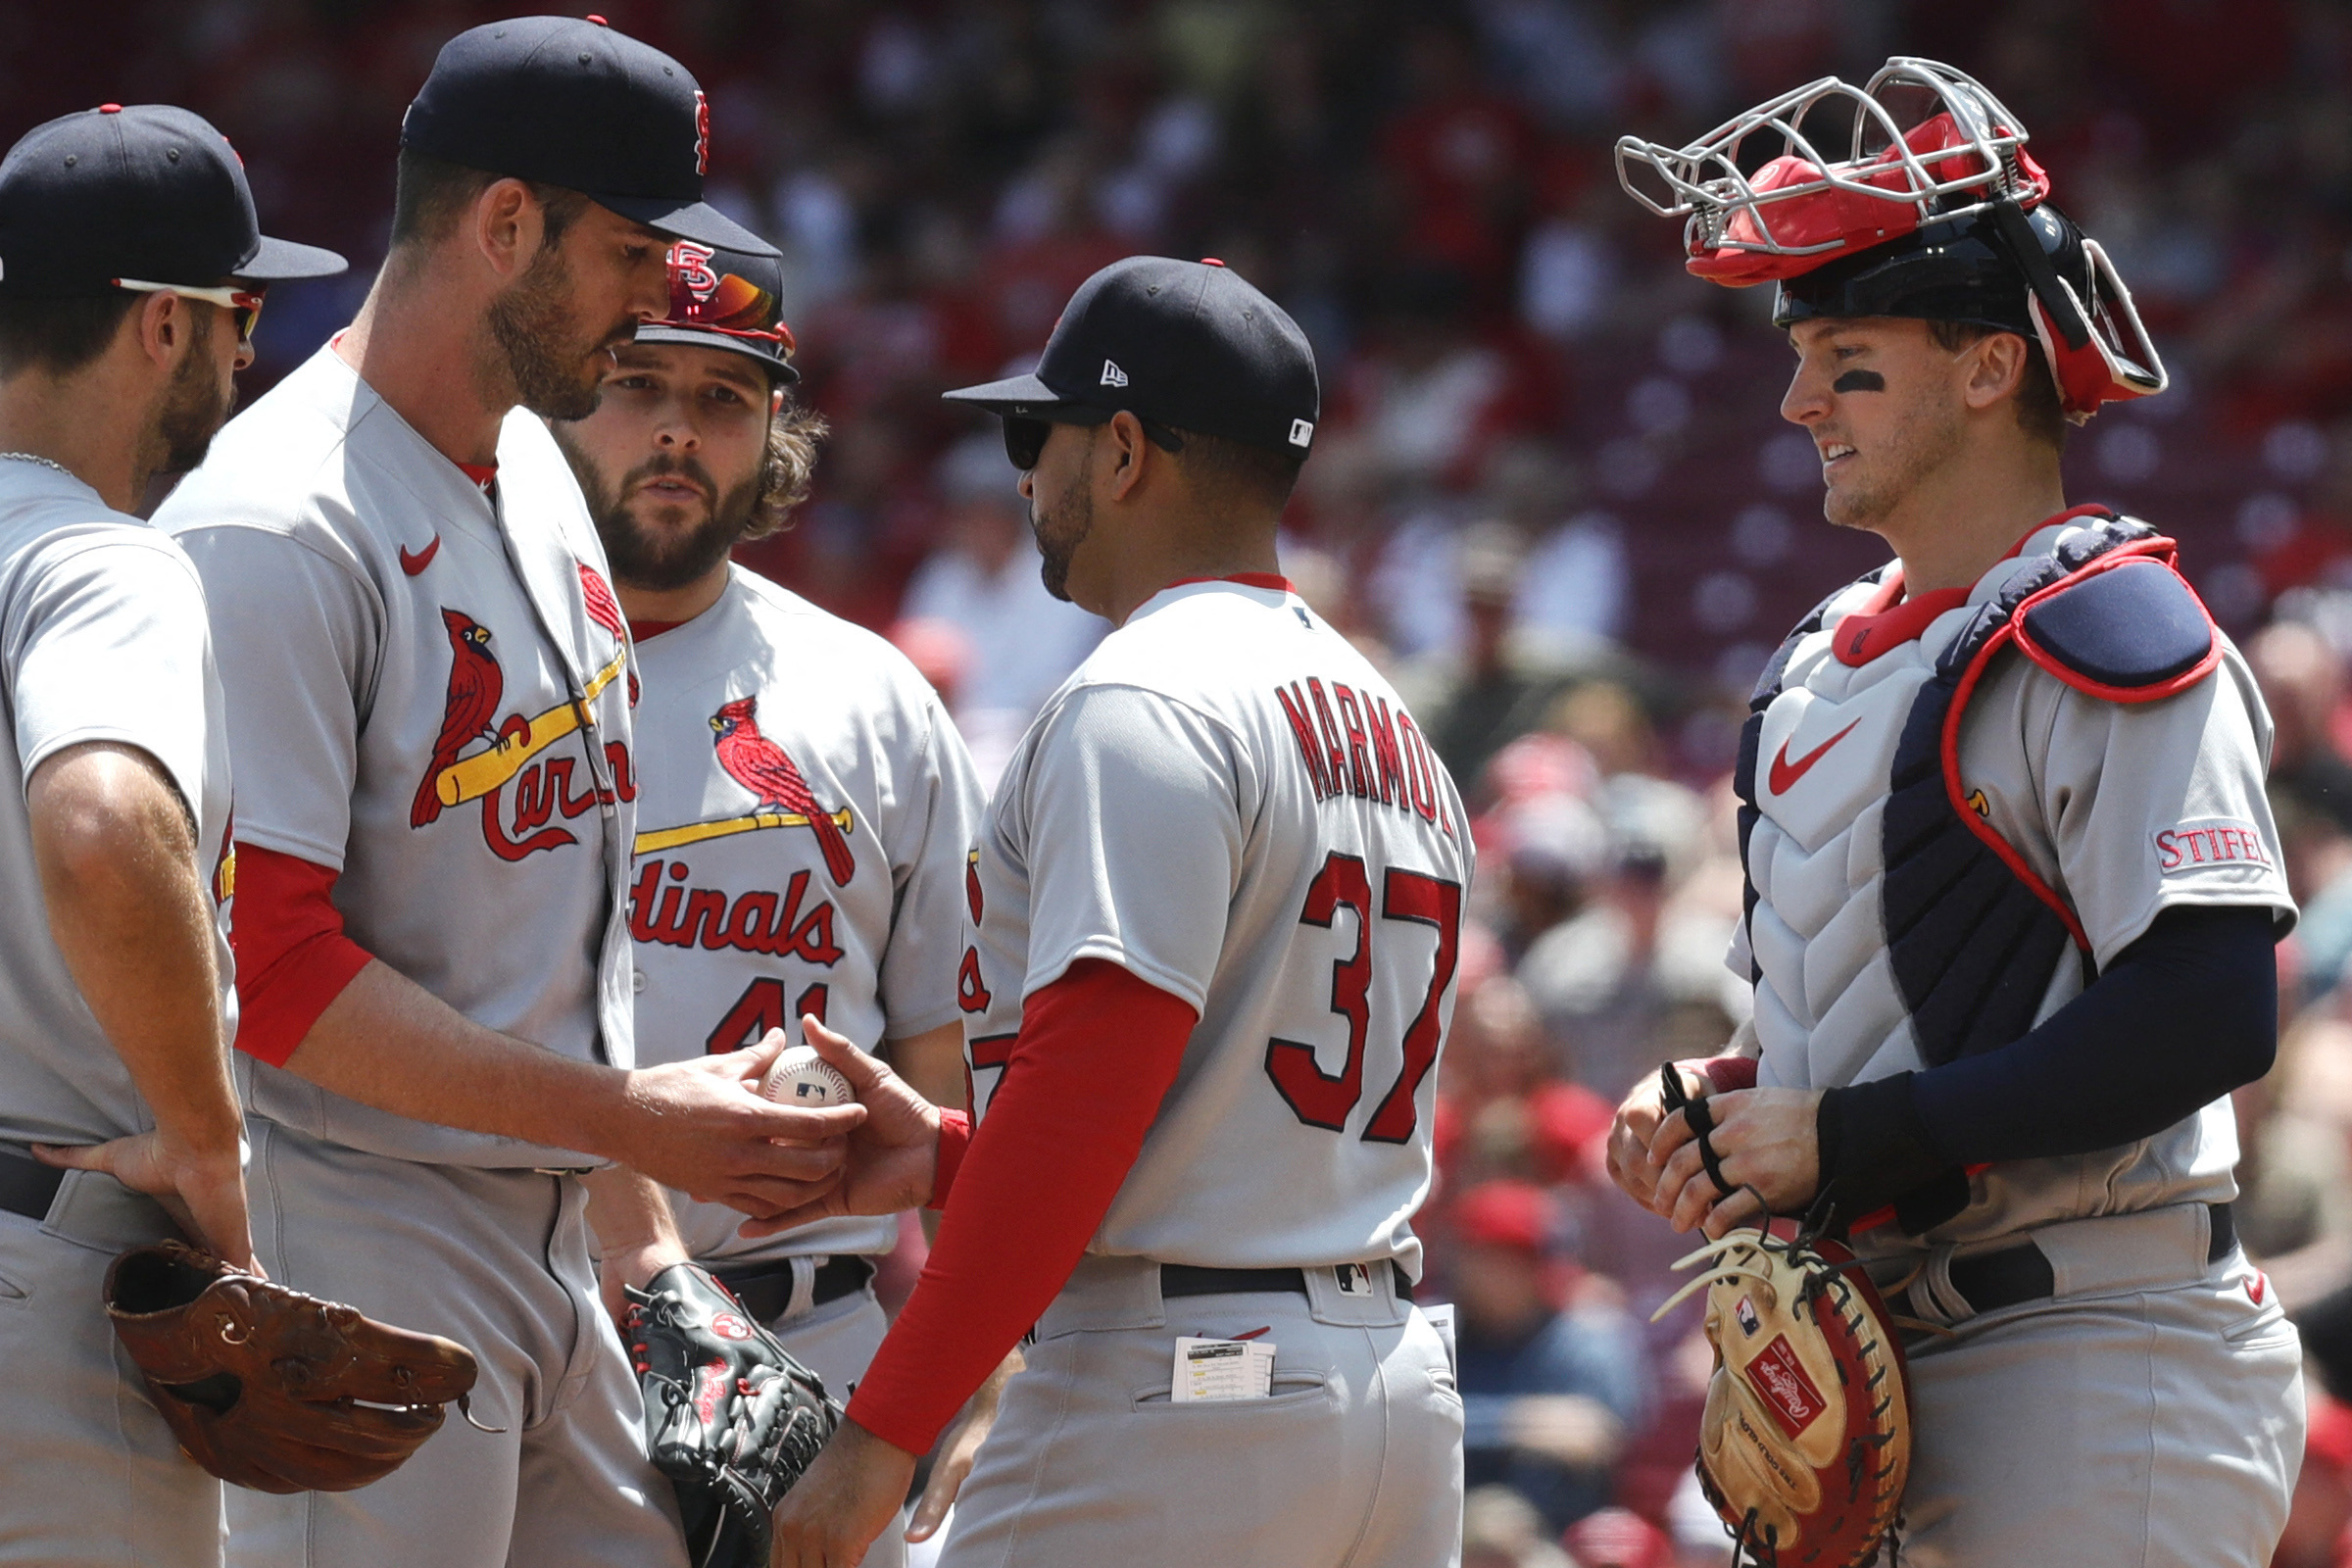 Cardinals squeak by Reds to earn series split